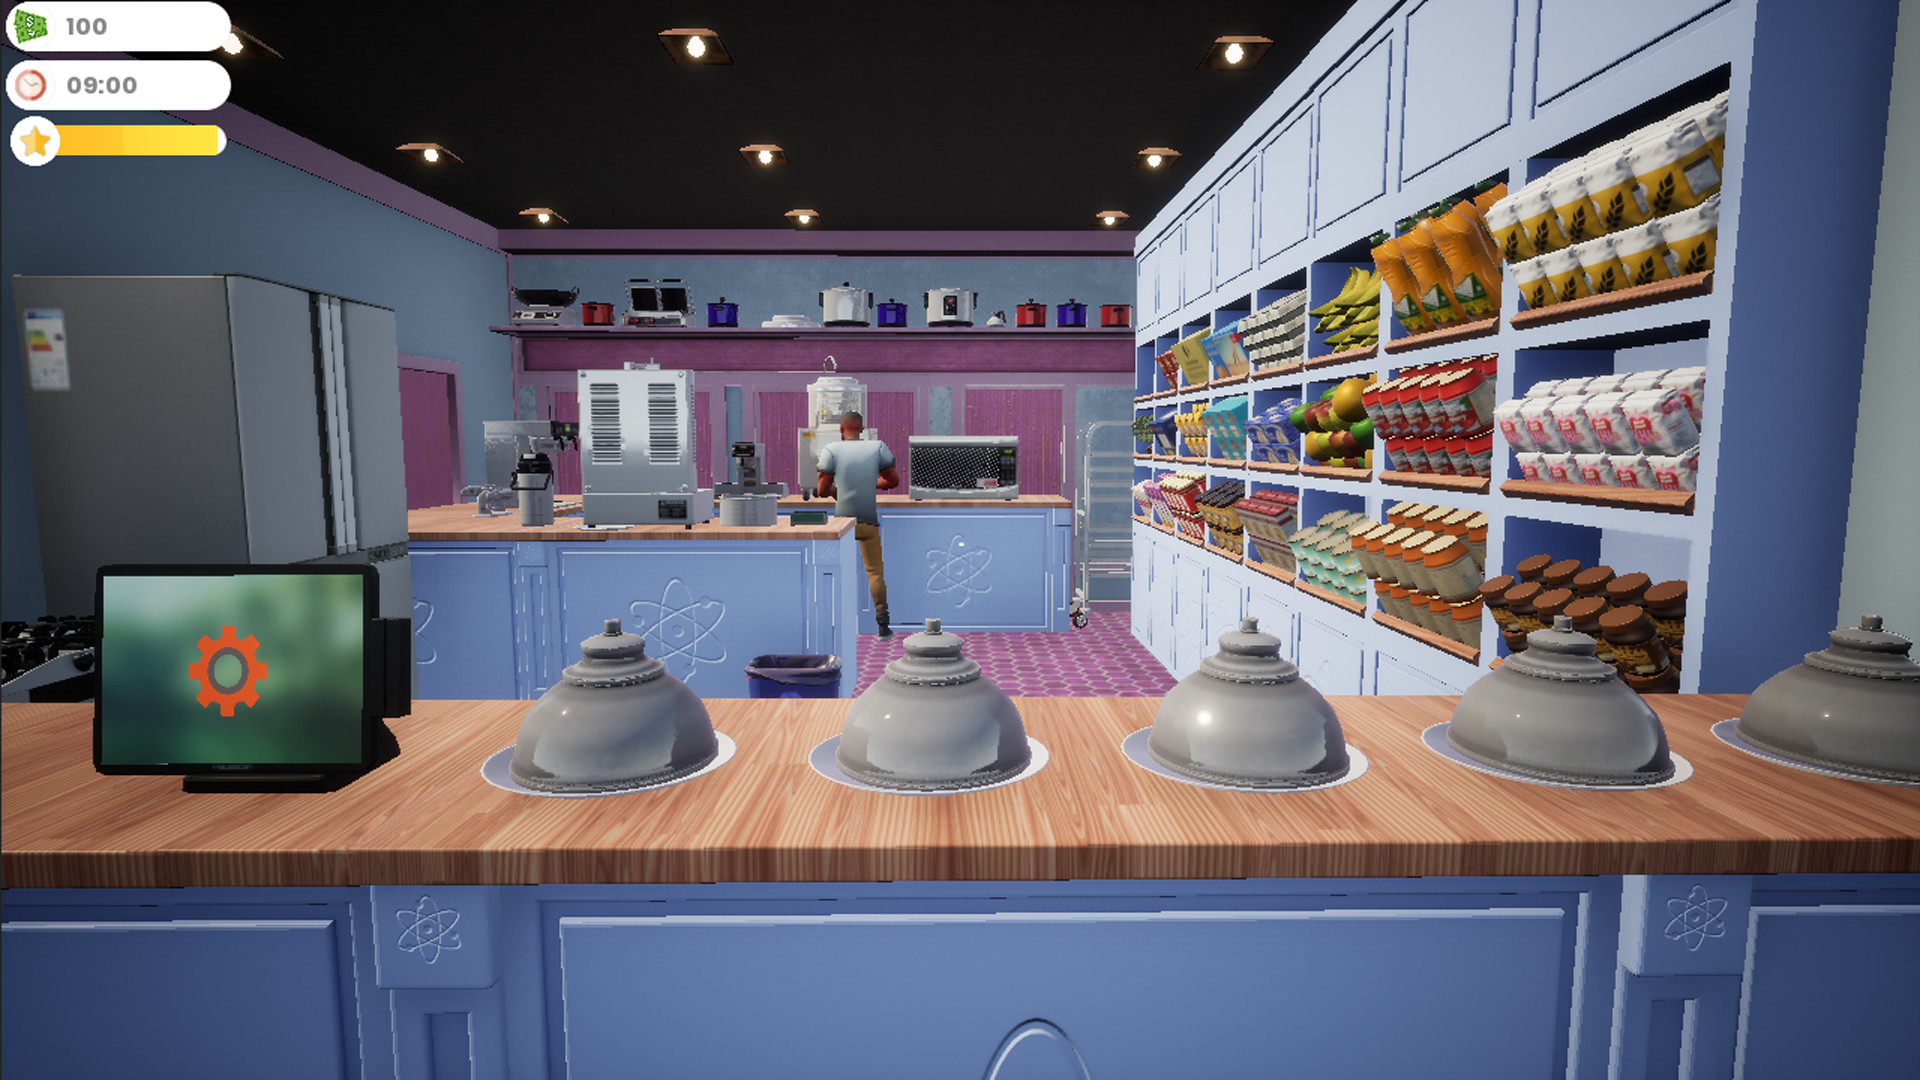 Find the best laptops for Bakery Shop Simulator